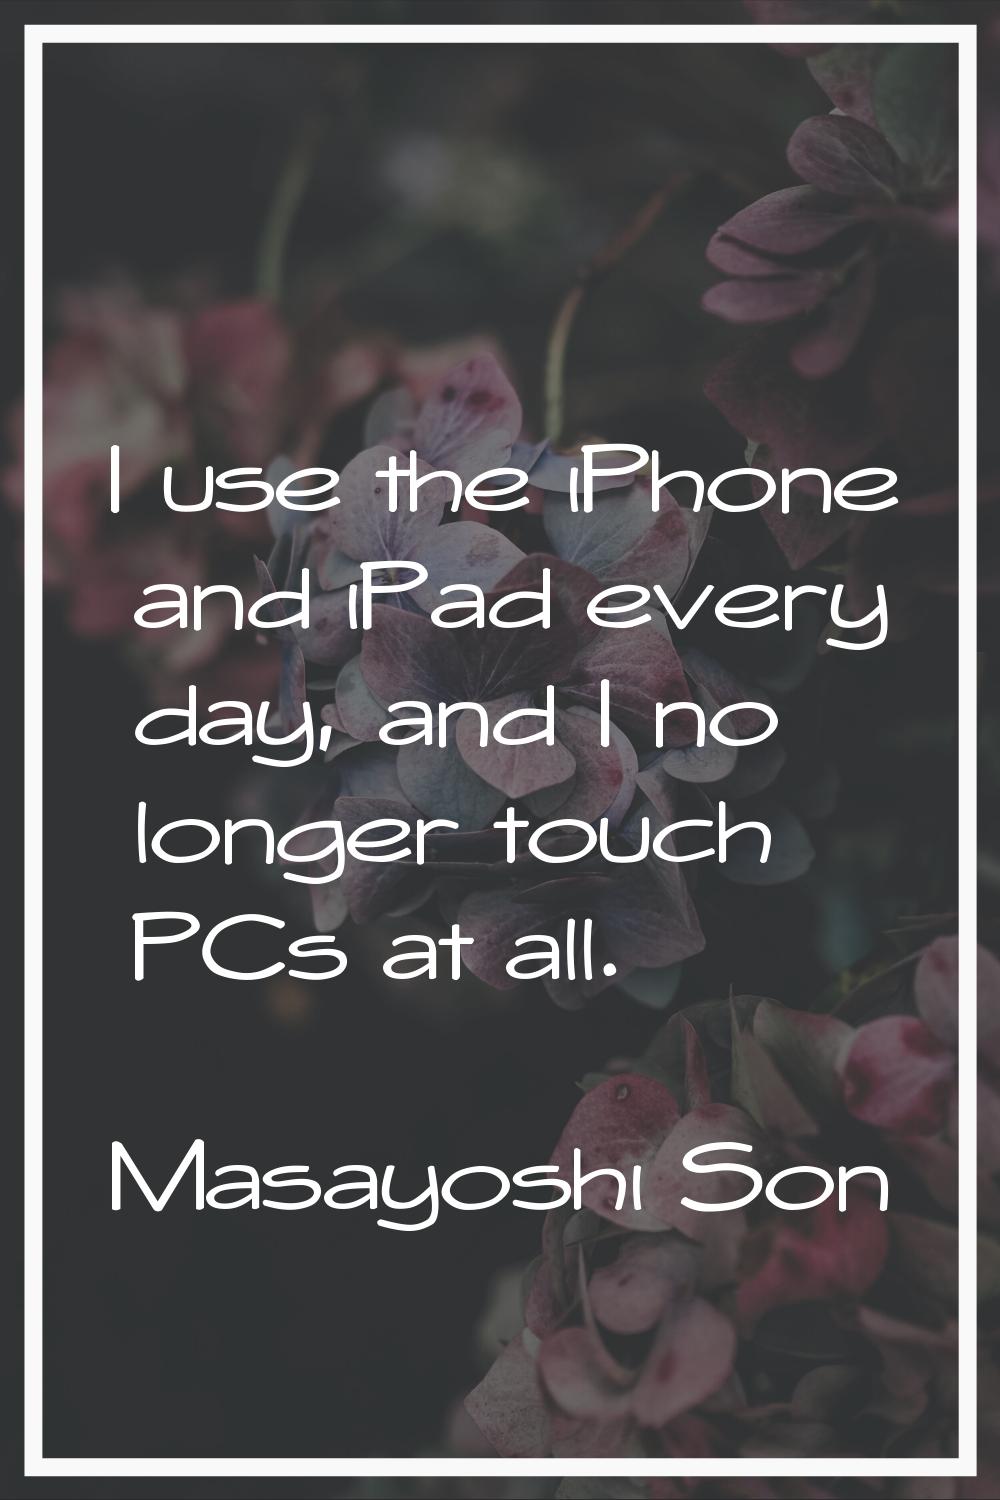 I use the iPhone and iPad every day, and I no longer touch PCs at all.